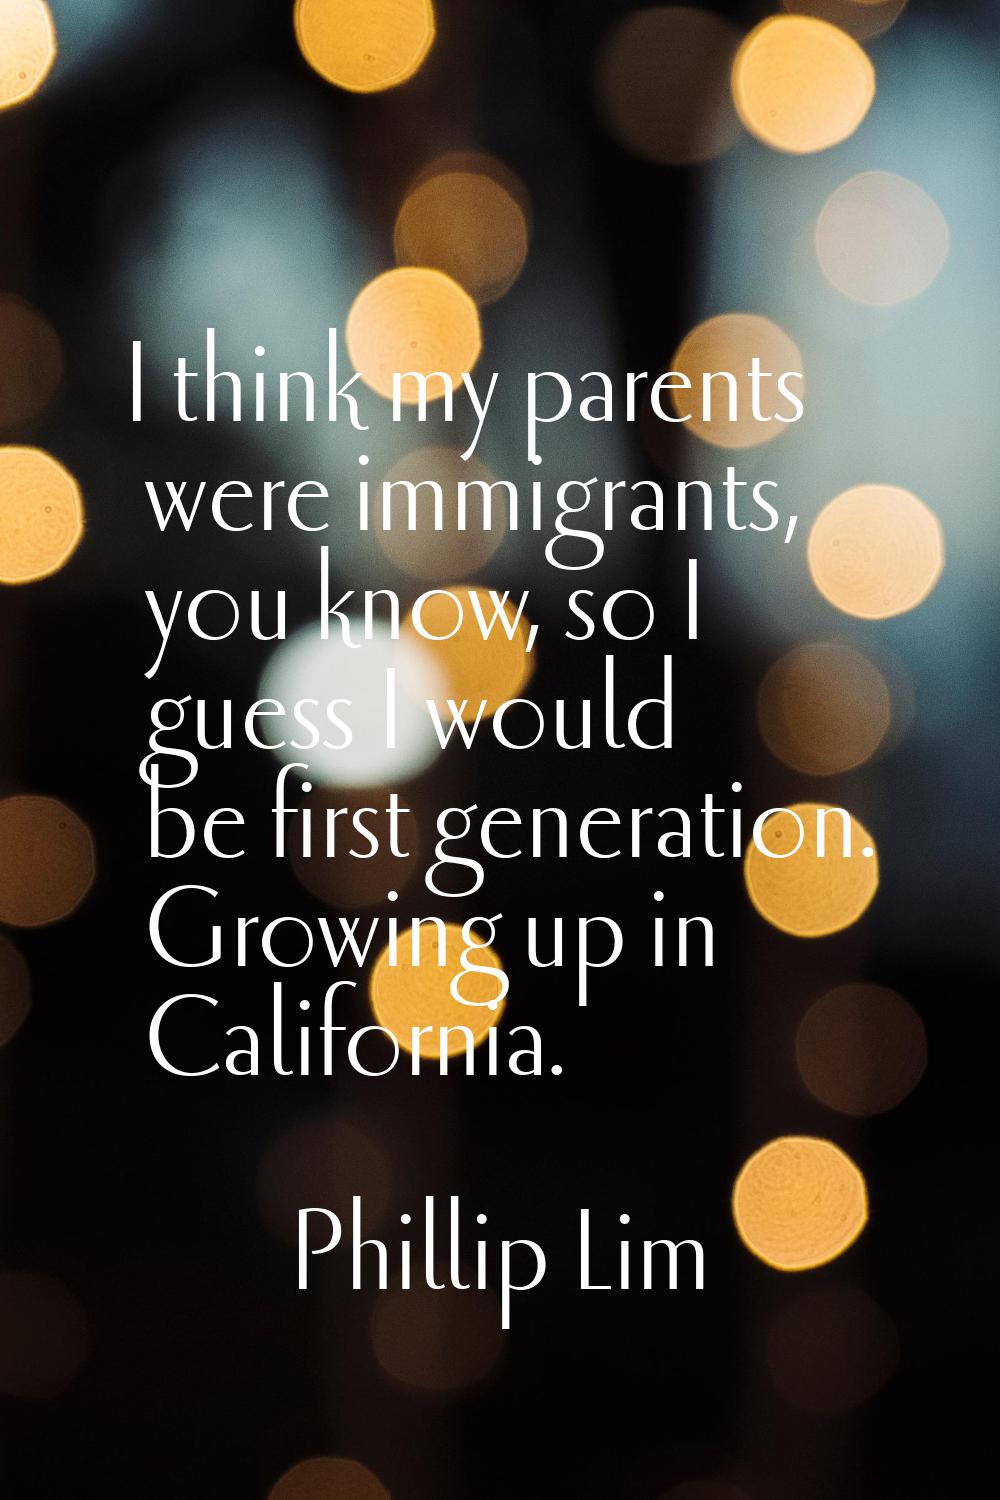 I think my parents were immigrants, you know, so I guess I would be first generation. Growing up in